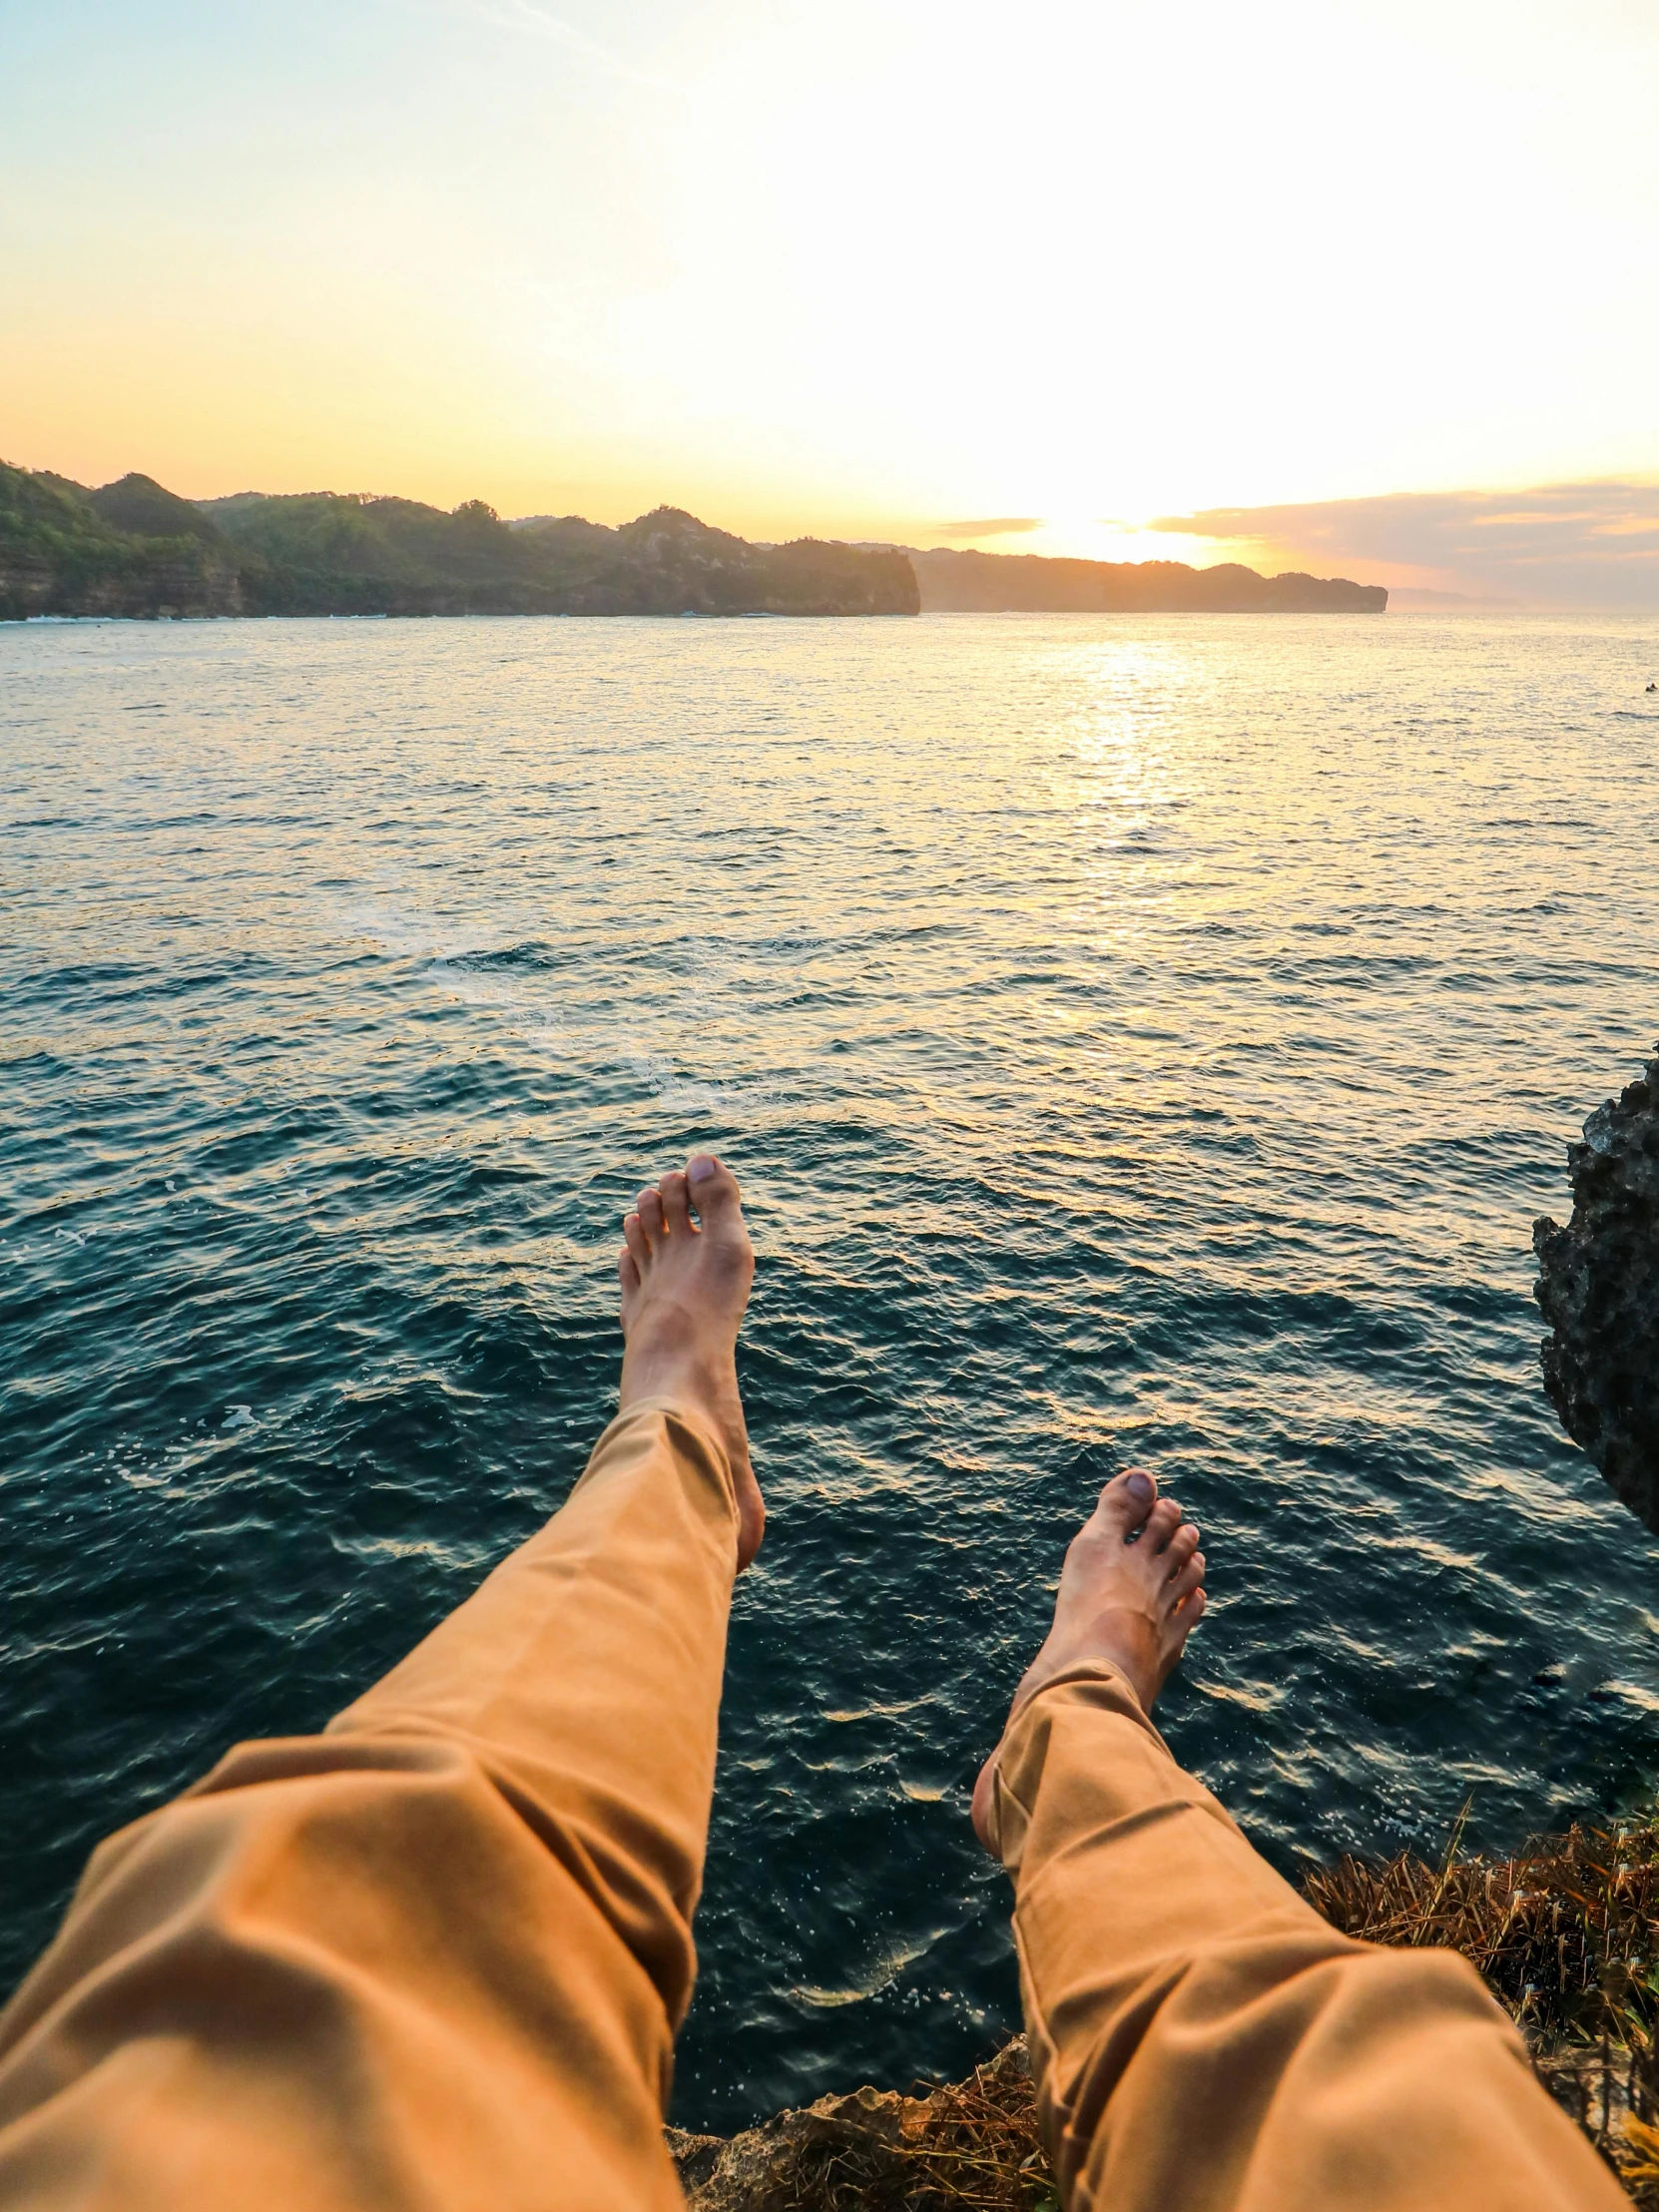 a person sitting on top of a rock next to a body of water, barefeet, during a sunset, full body pov, steep cliffs